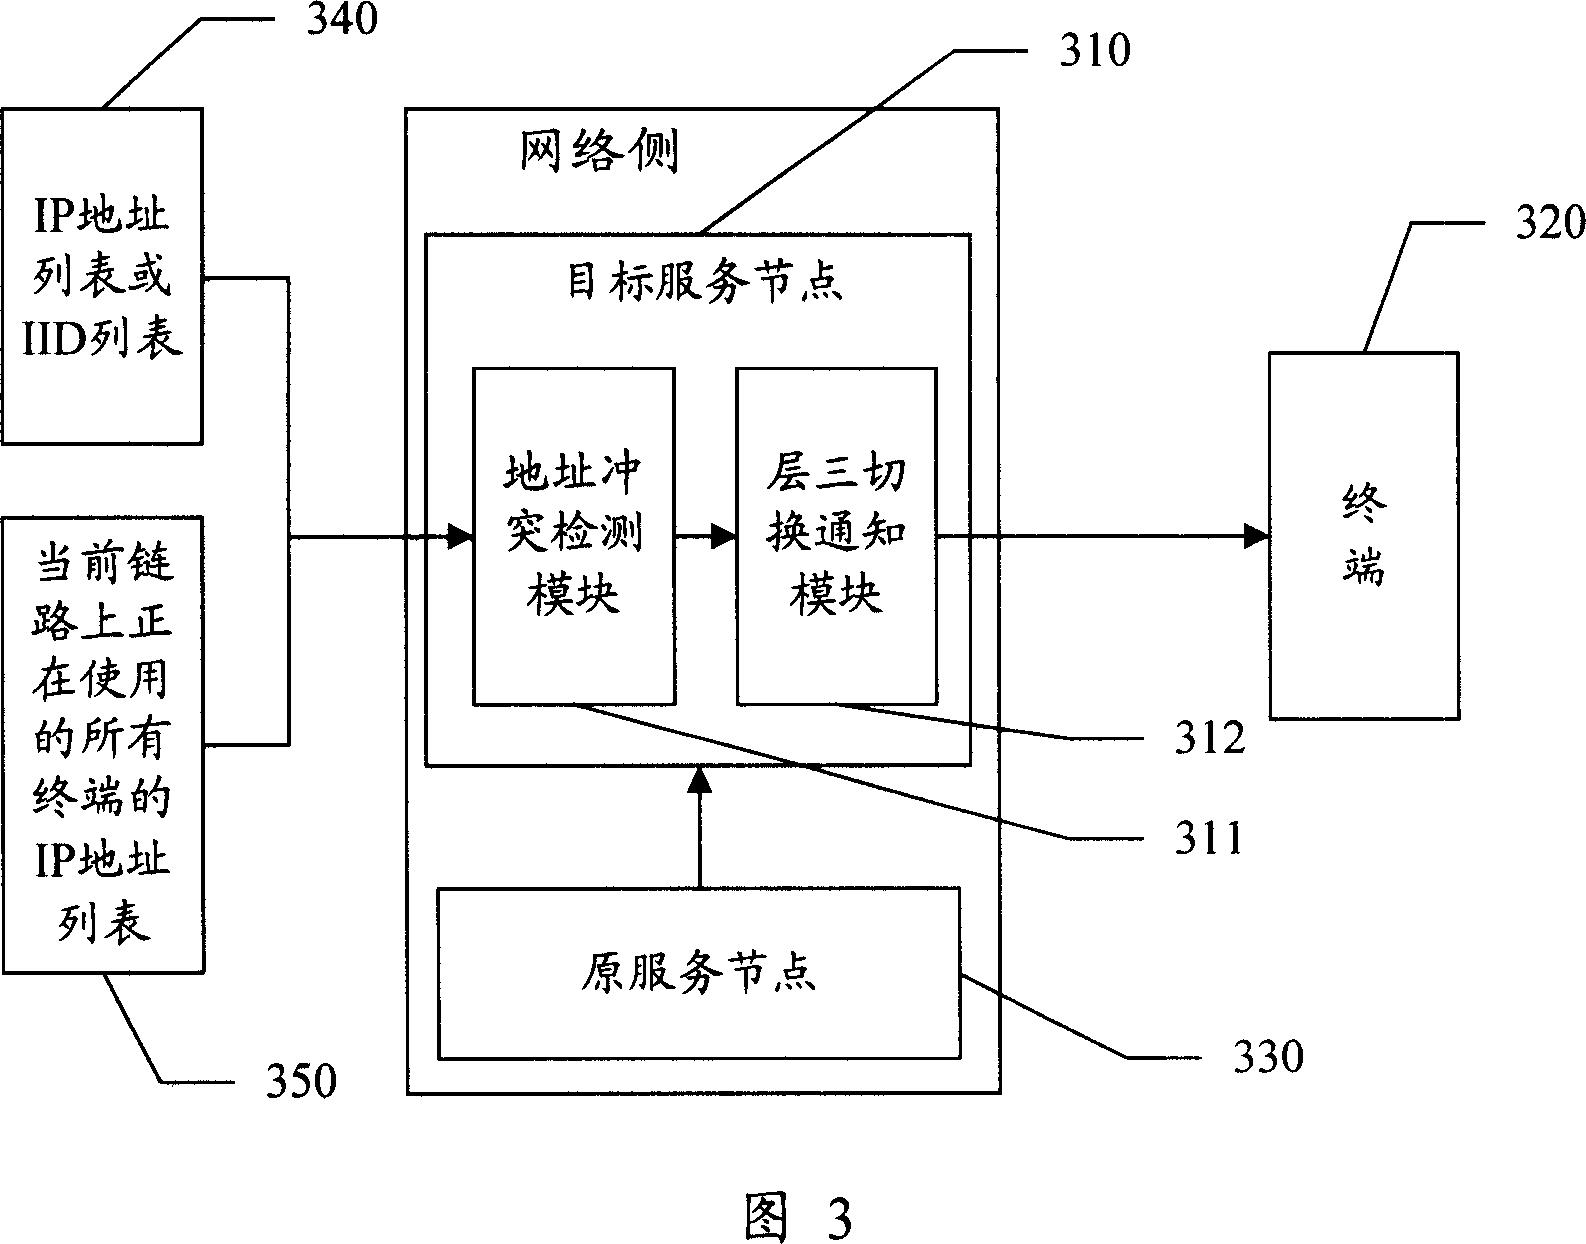 Method and system for processing three-layer switch